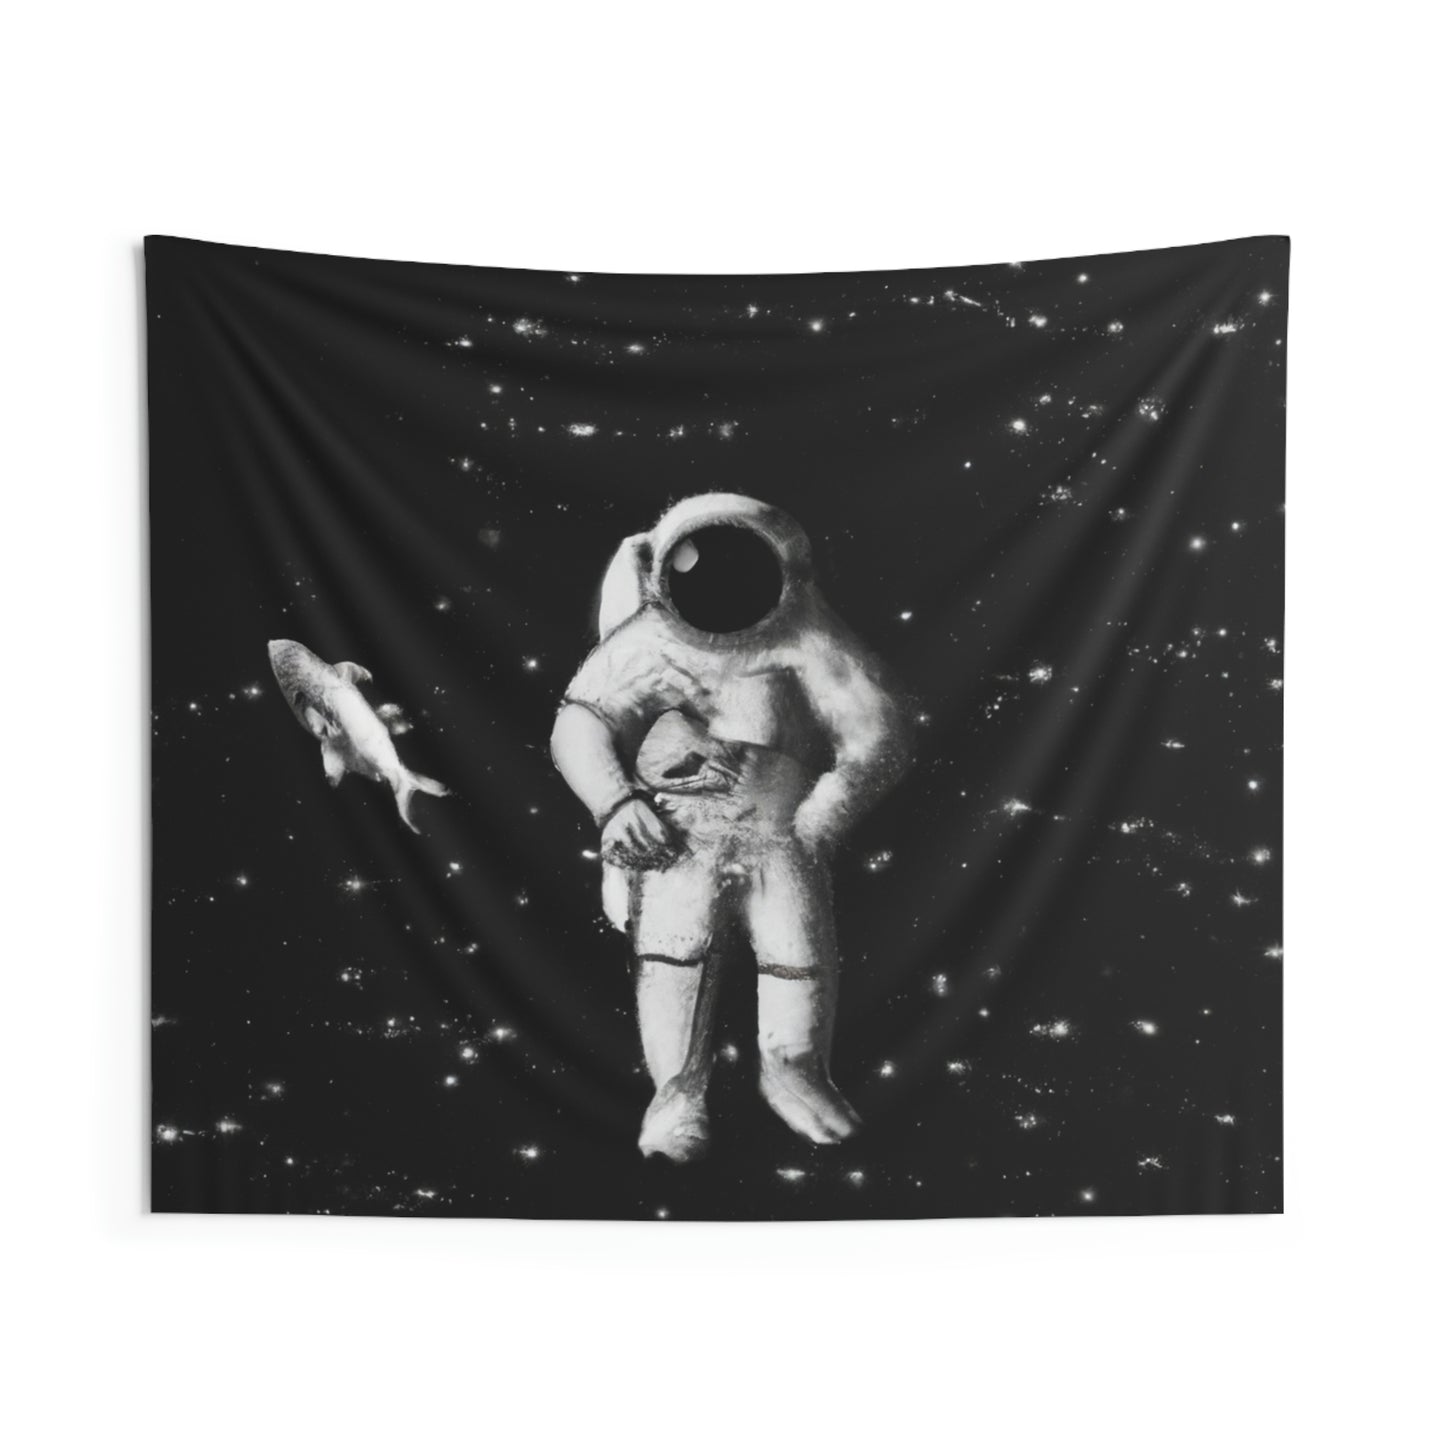 "A Celestial Sea Dance" - The Alien Wall Tapestries